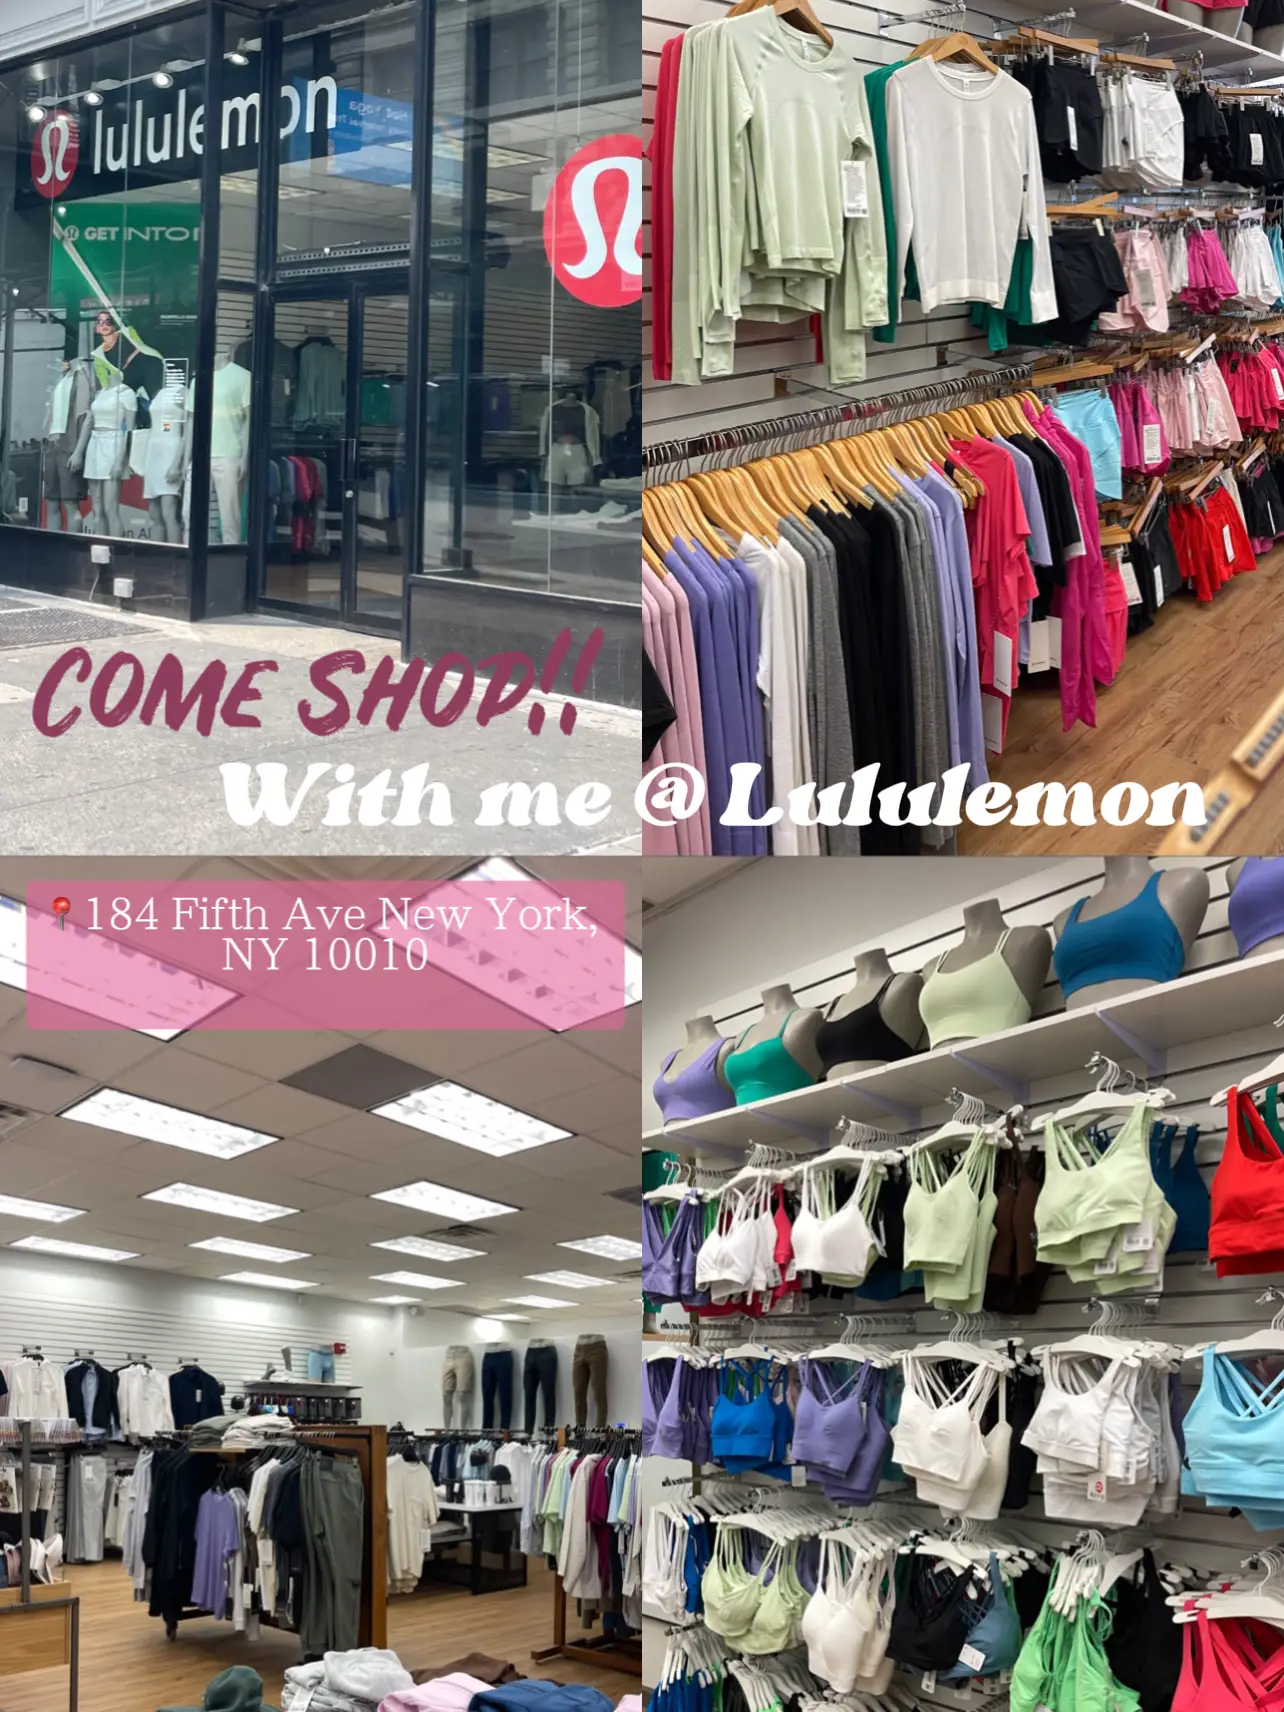 Lululemon Dupes at Tj Maxx for less!, Gallery posted by Robyn